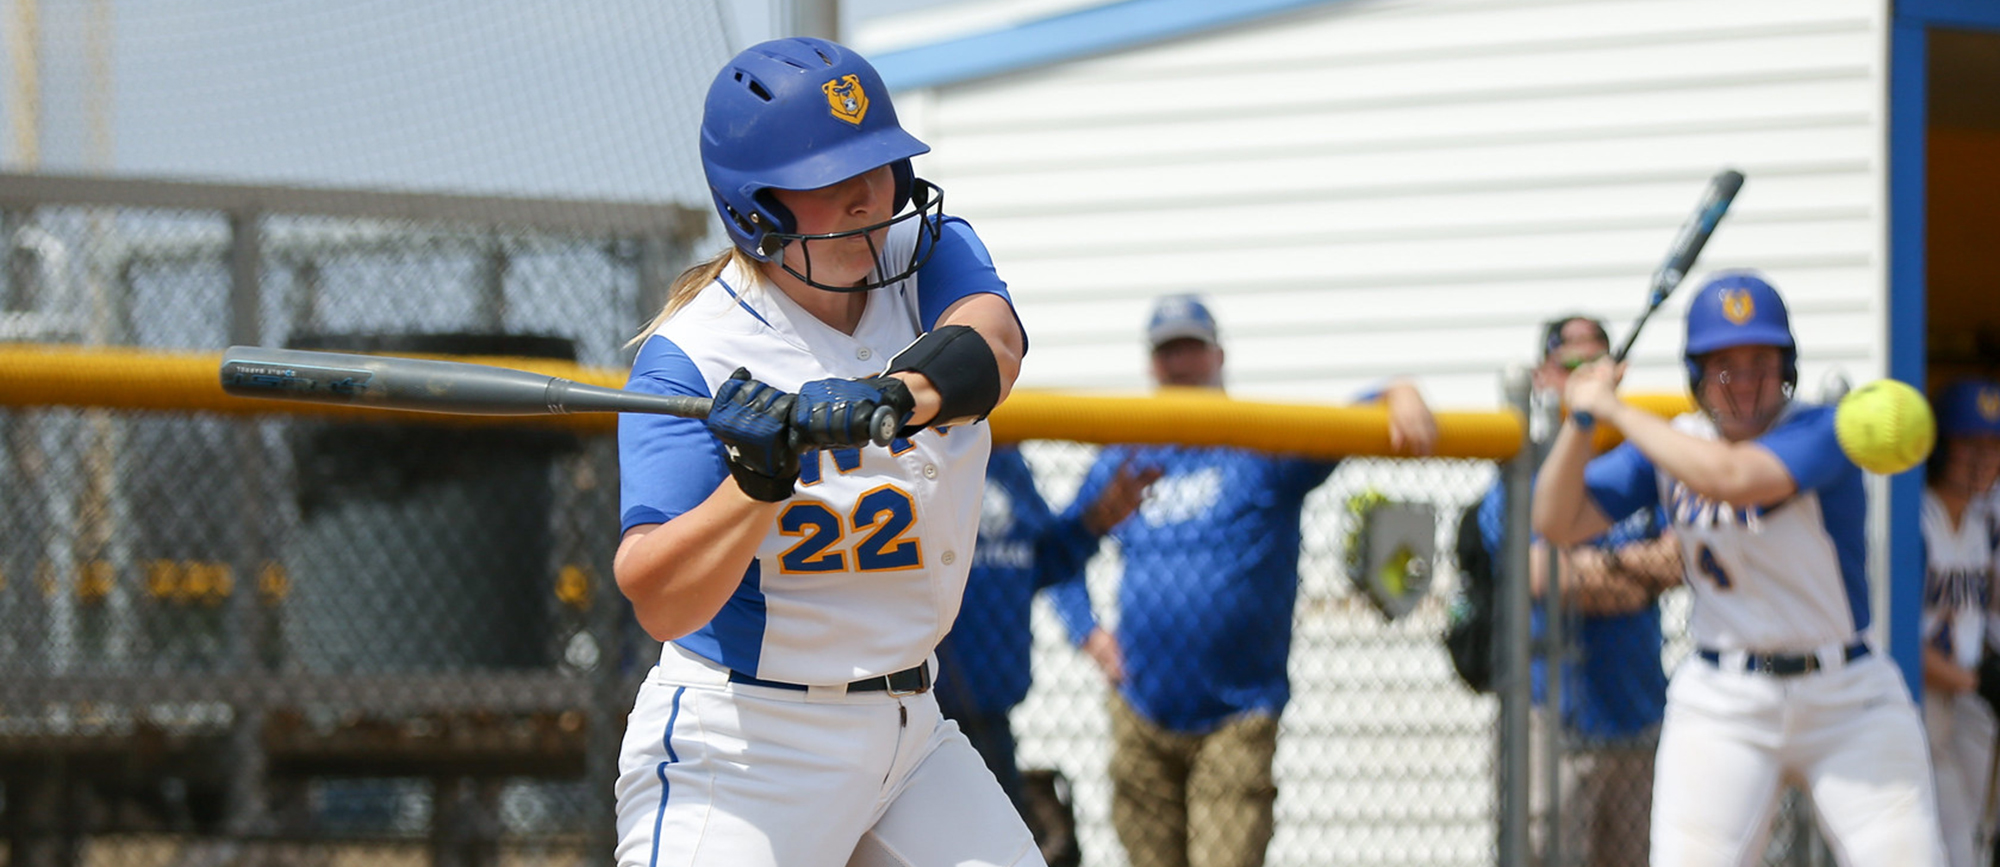 Aimee Kistner hit a three-run double in the second game of Western New England's doubleheader split with Gordon on Saturday. (Photo by Chris Marion)